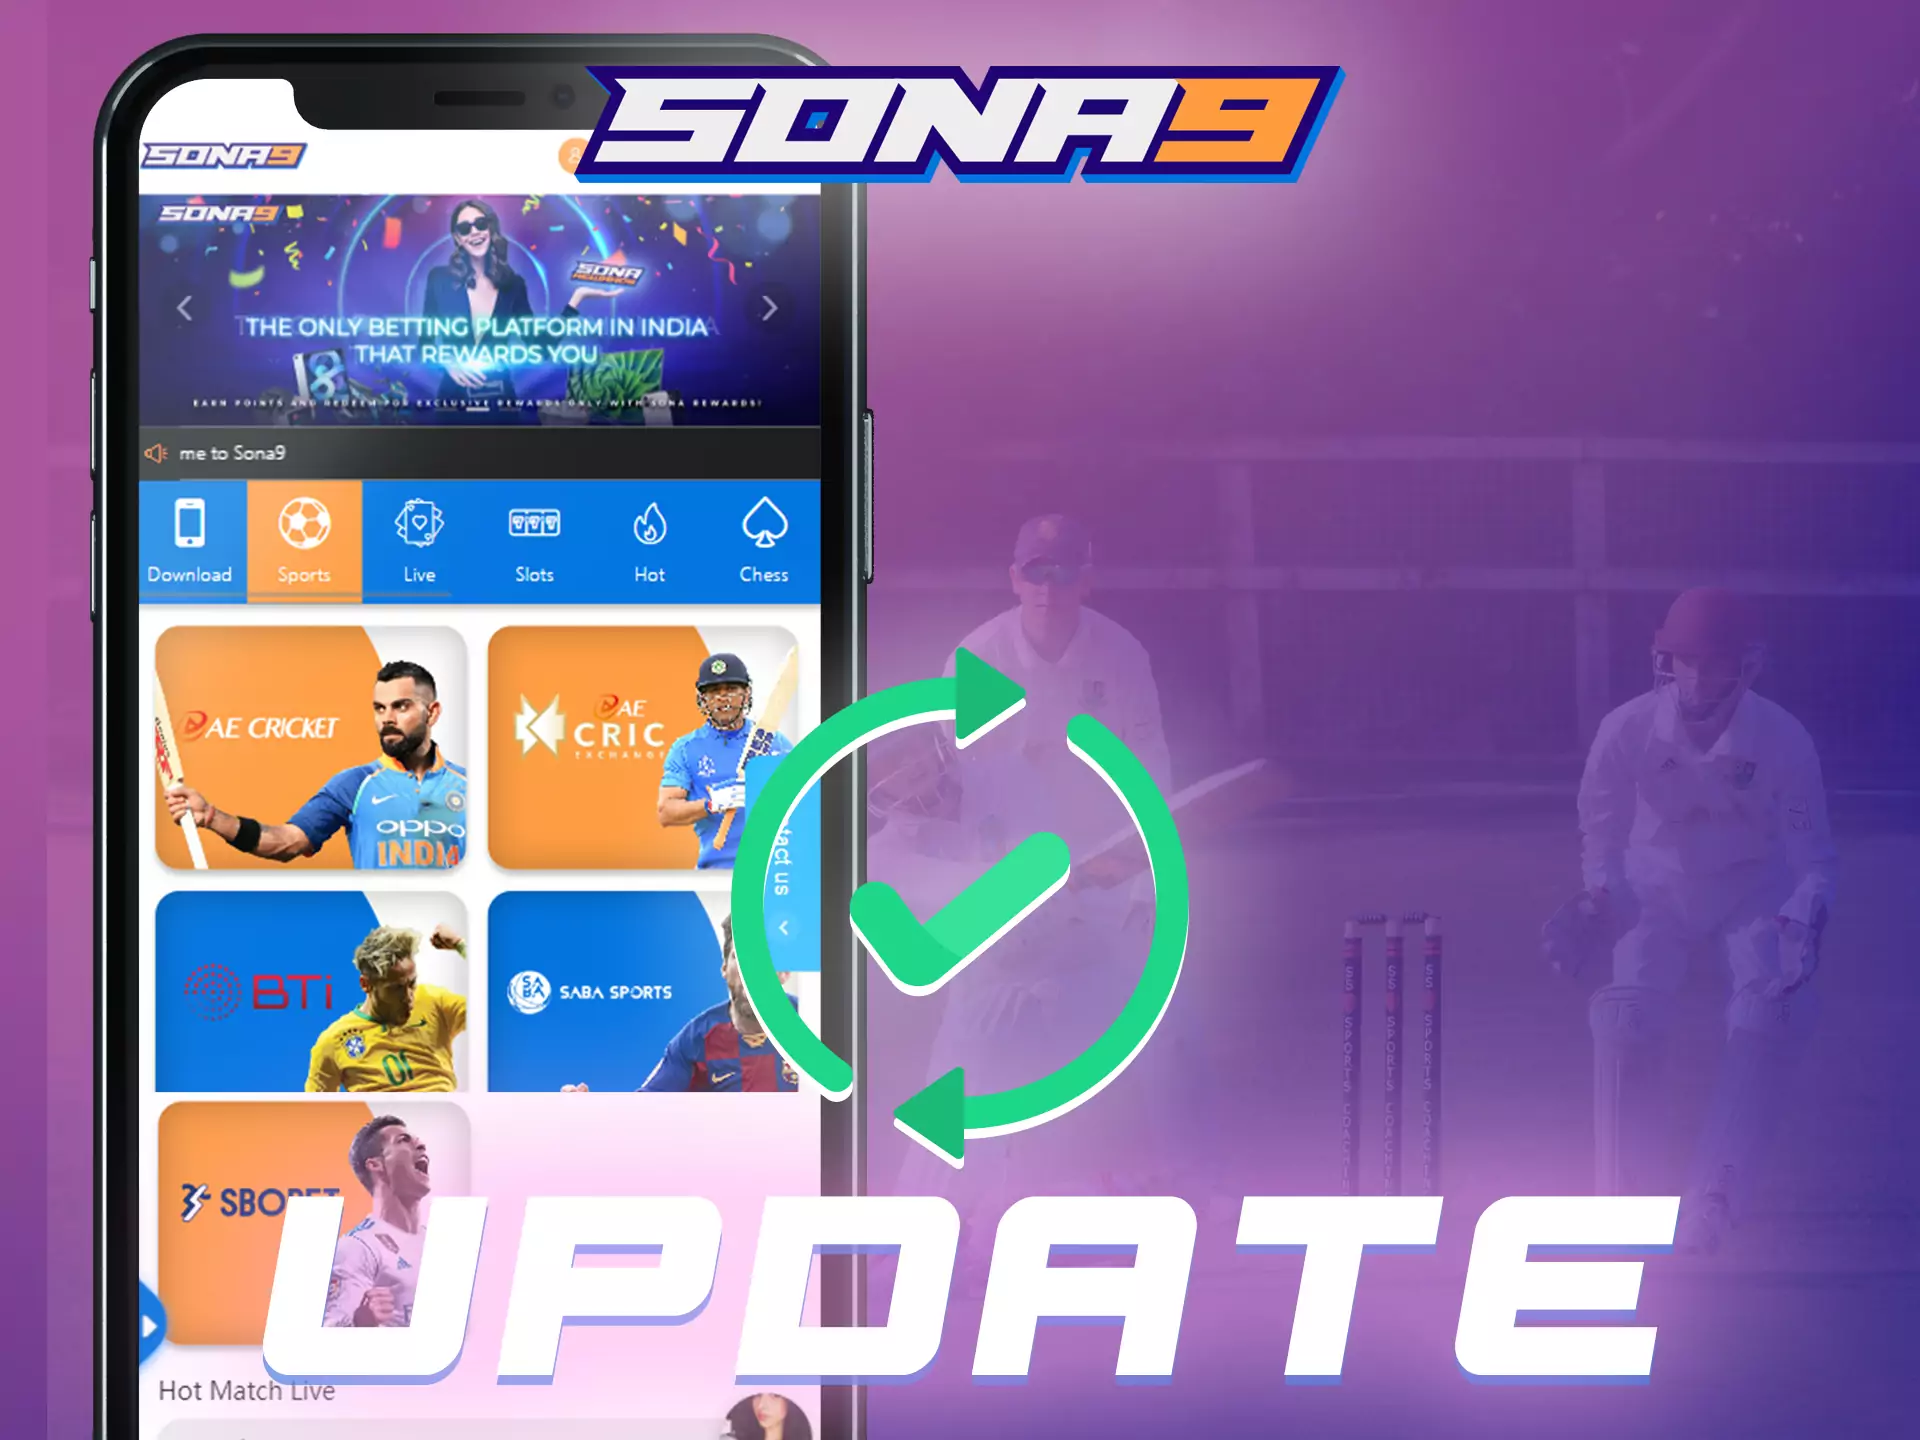 We recommend updating the Sona9 app regularly to get all the newest features on time.